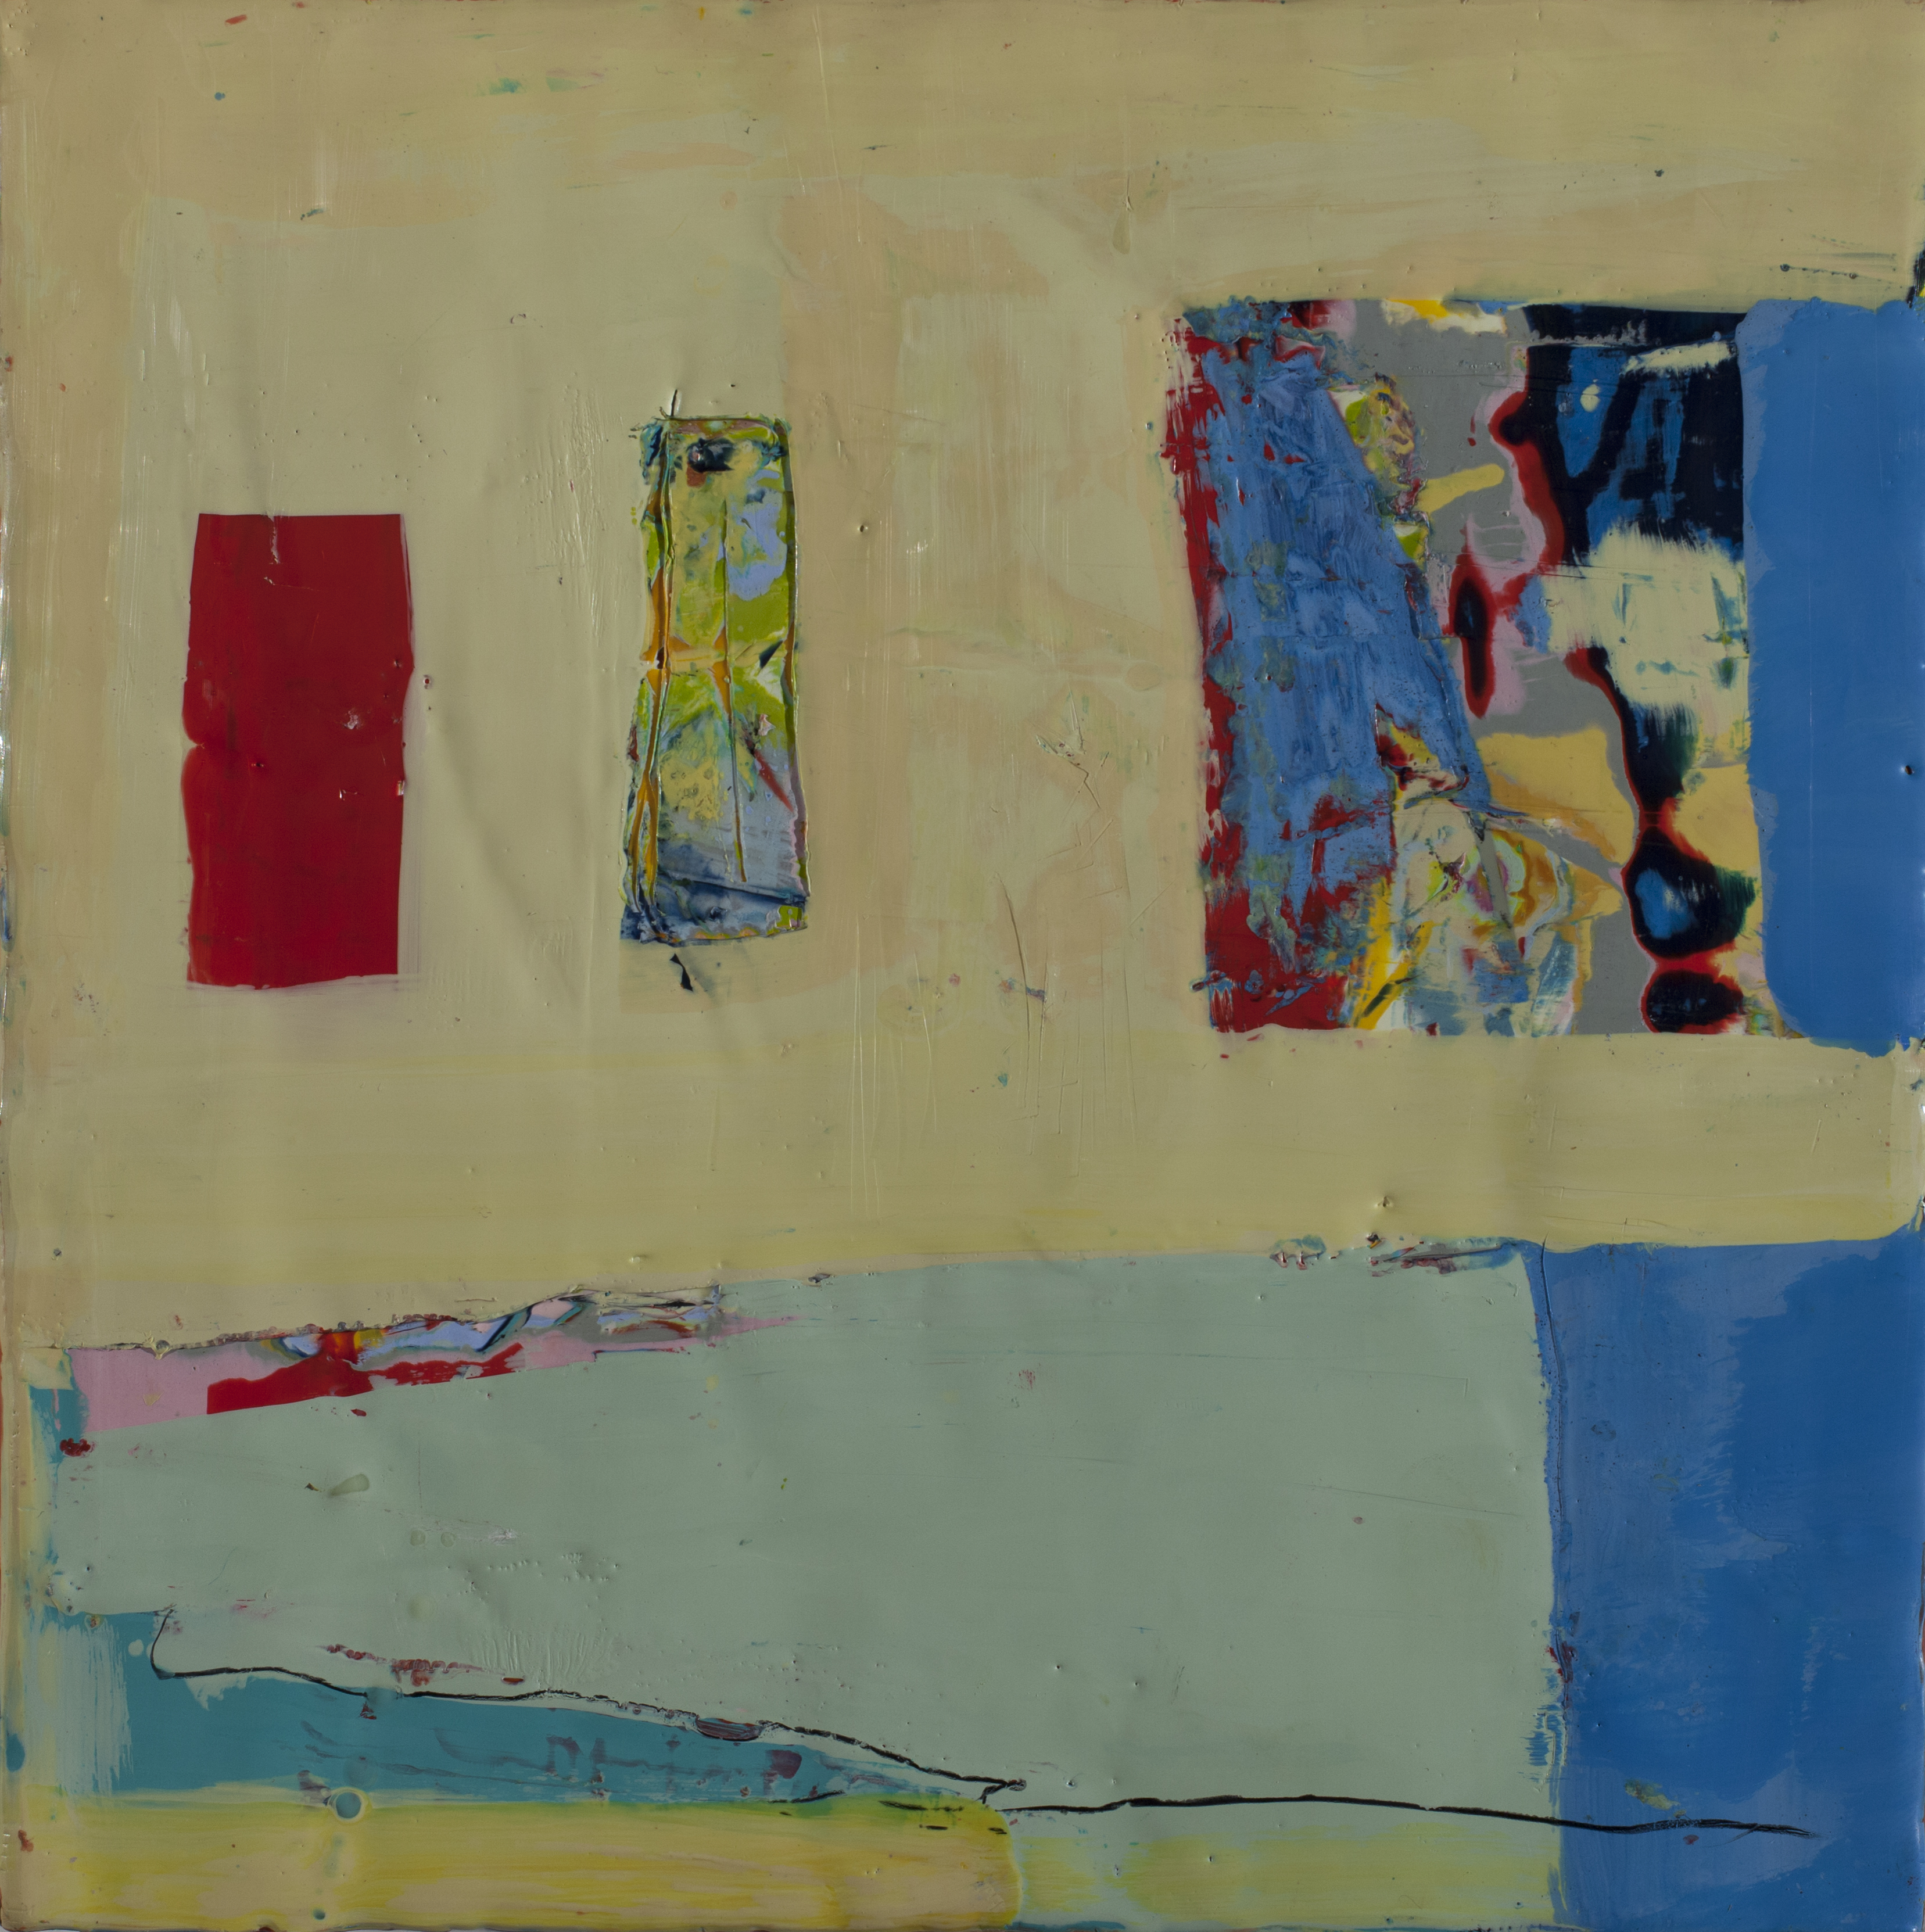 Contrasting Abstractions, October 8, 2015 from 6-8pm at Gallery at ...